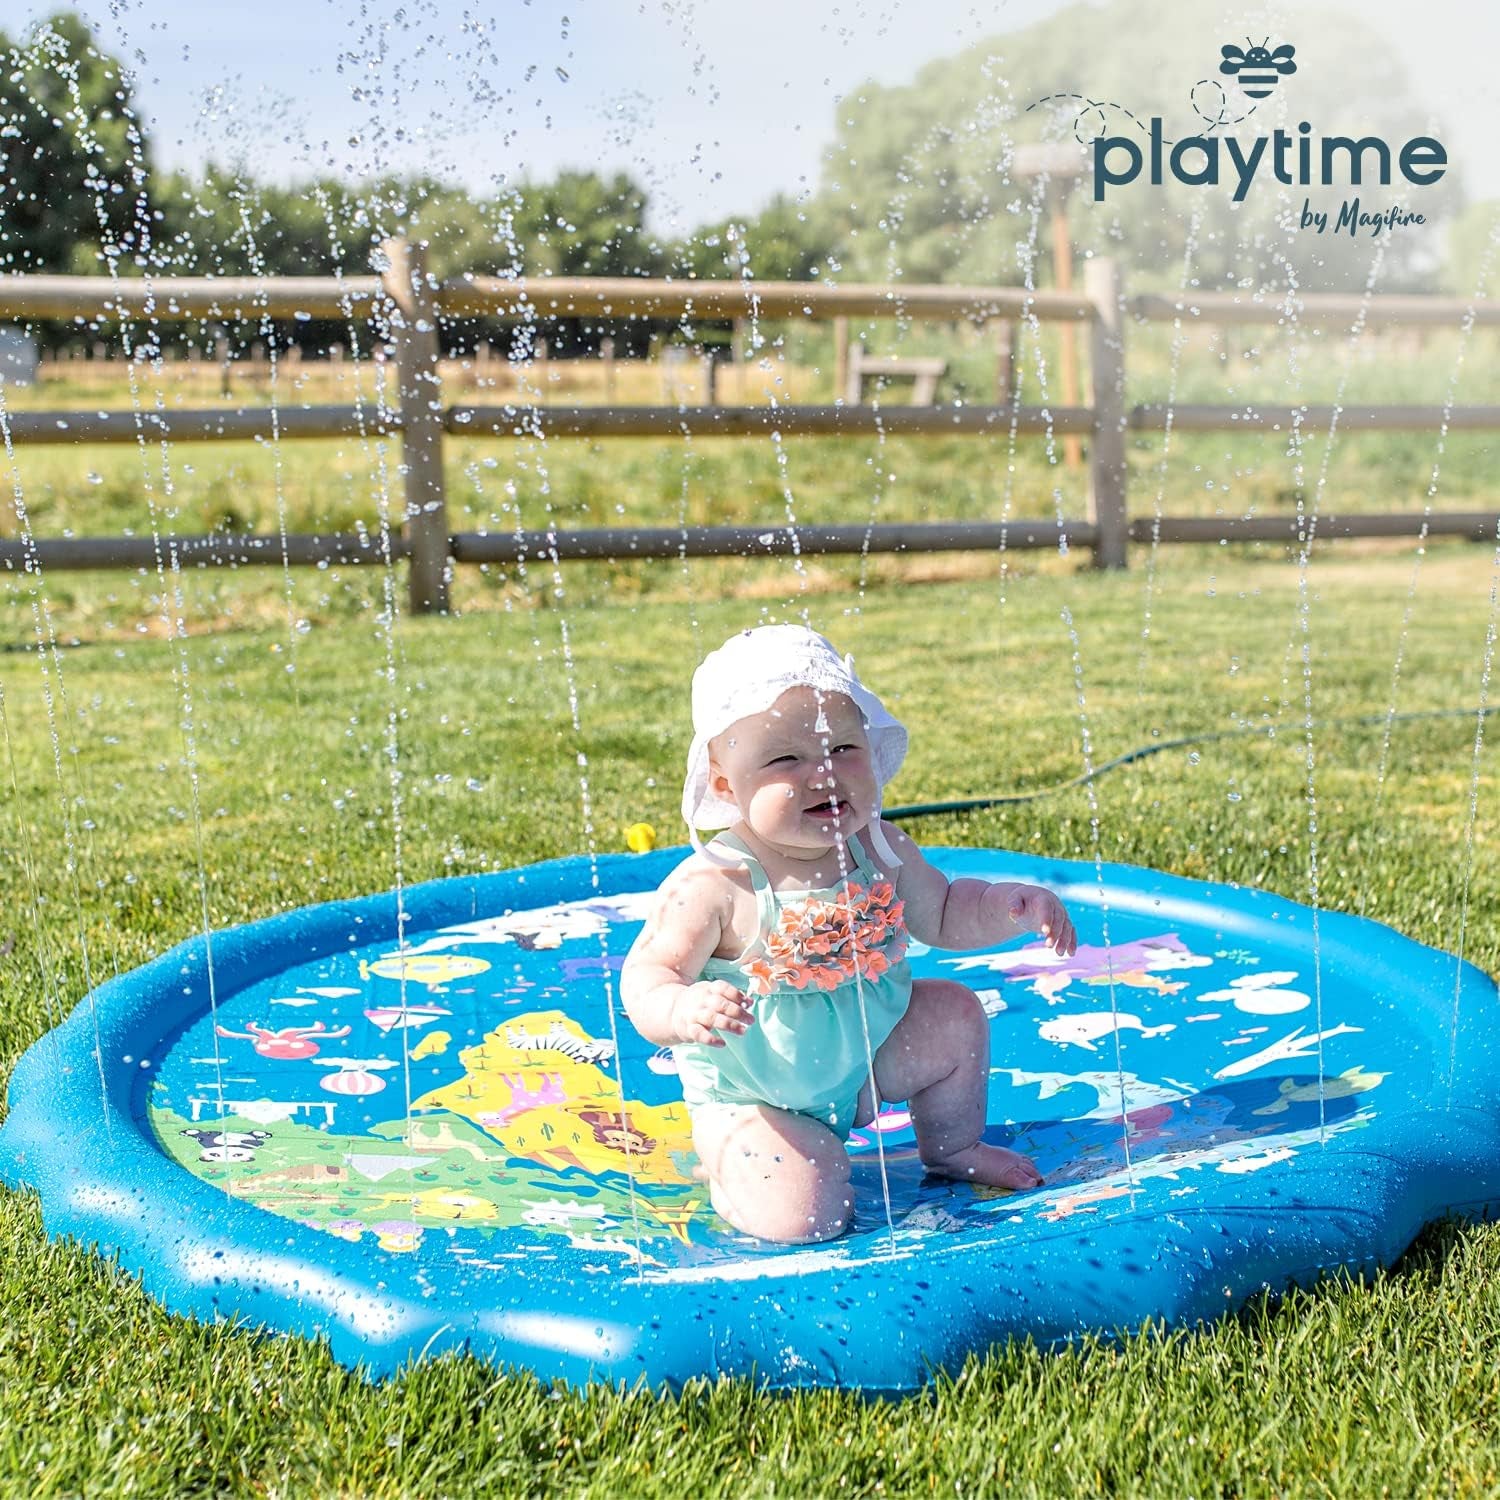 Sprinkler Splash Pad for Toddlers 1-3, 59 In., Water Toys for Dogs, Kids, Outdoor Baby Toys Ideal for Playtime and Cooling off Outside, Easy to Setup, Ideal for Summer and Backyard Activities